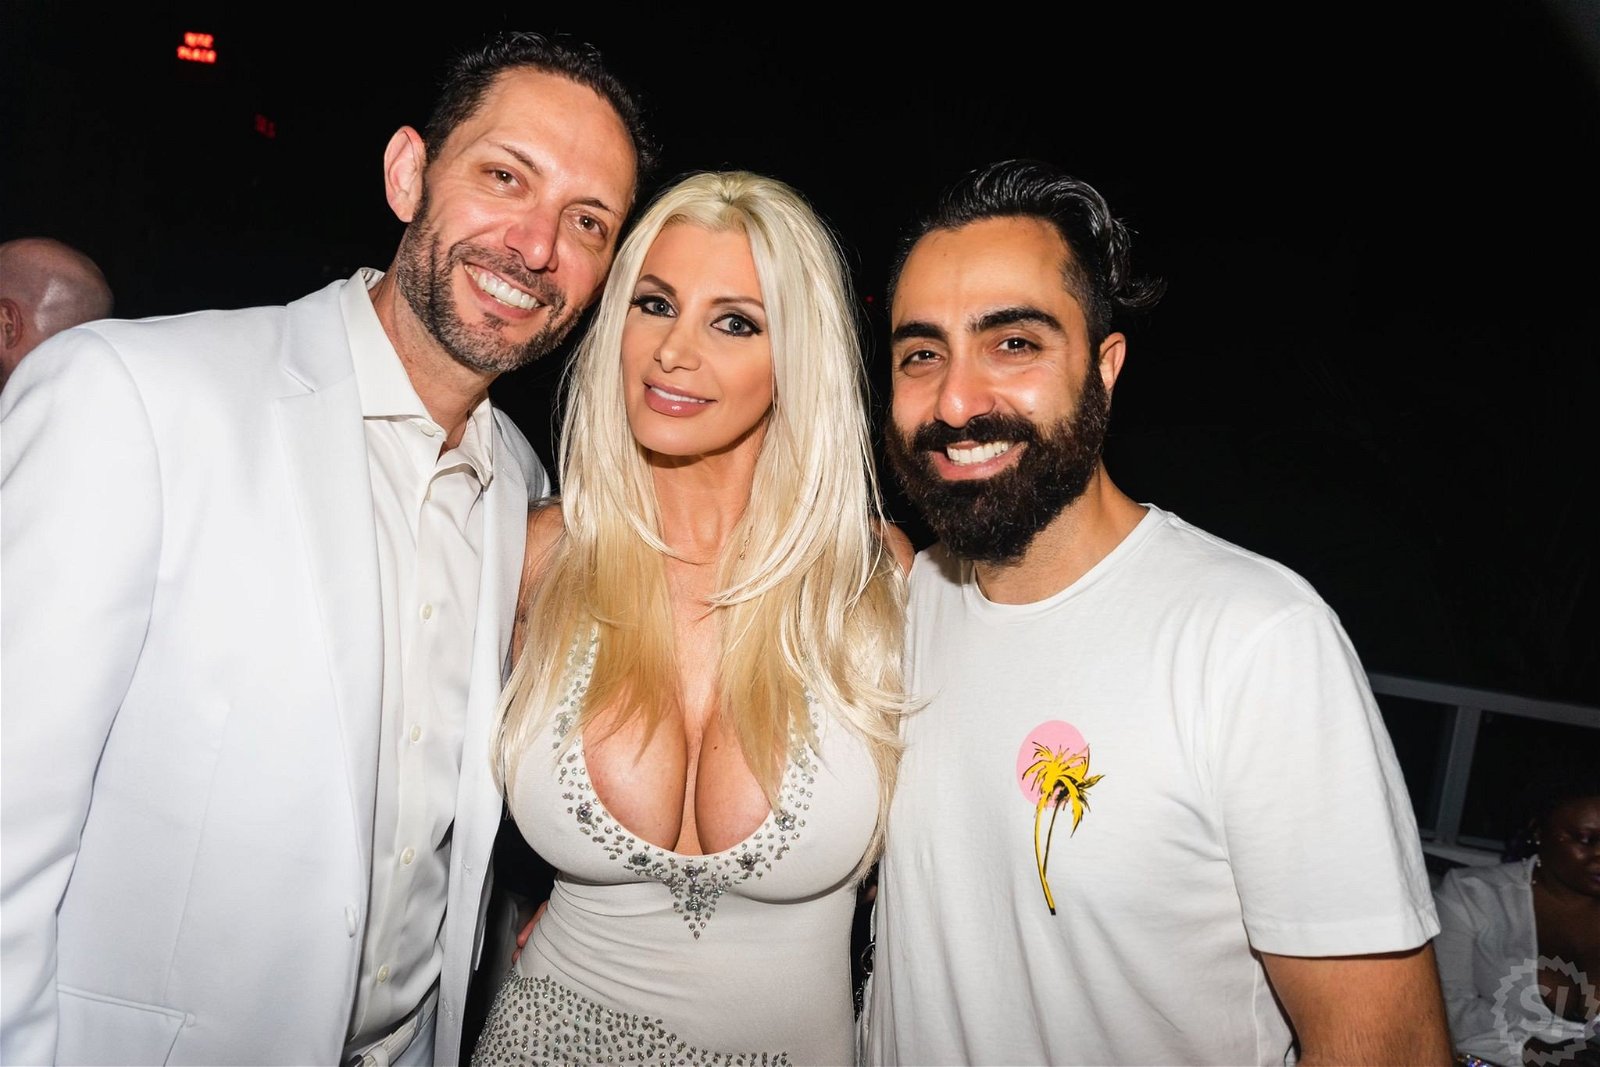 Photo by BrittanyAndrews with the username @BrittanyAndrews, who is a star user,  May 19, 2022 at 3:20 AM and the text says 'At the @XBIZ Miami White Party @AlejandroXBIZ @elevatedx 🤍 #xbizmiami #xbizmiami2022 #xbizcamawards'